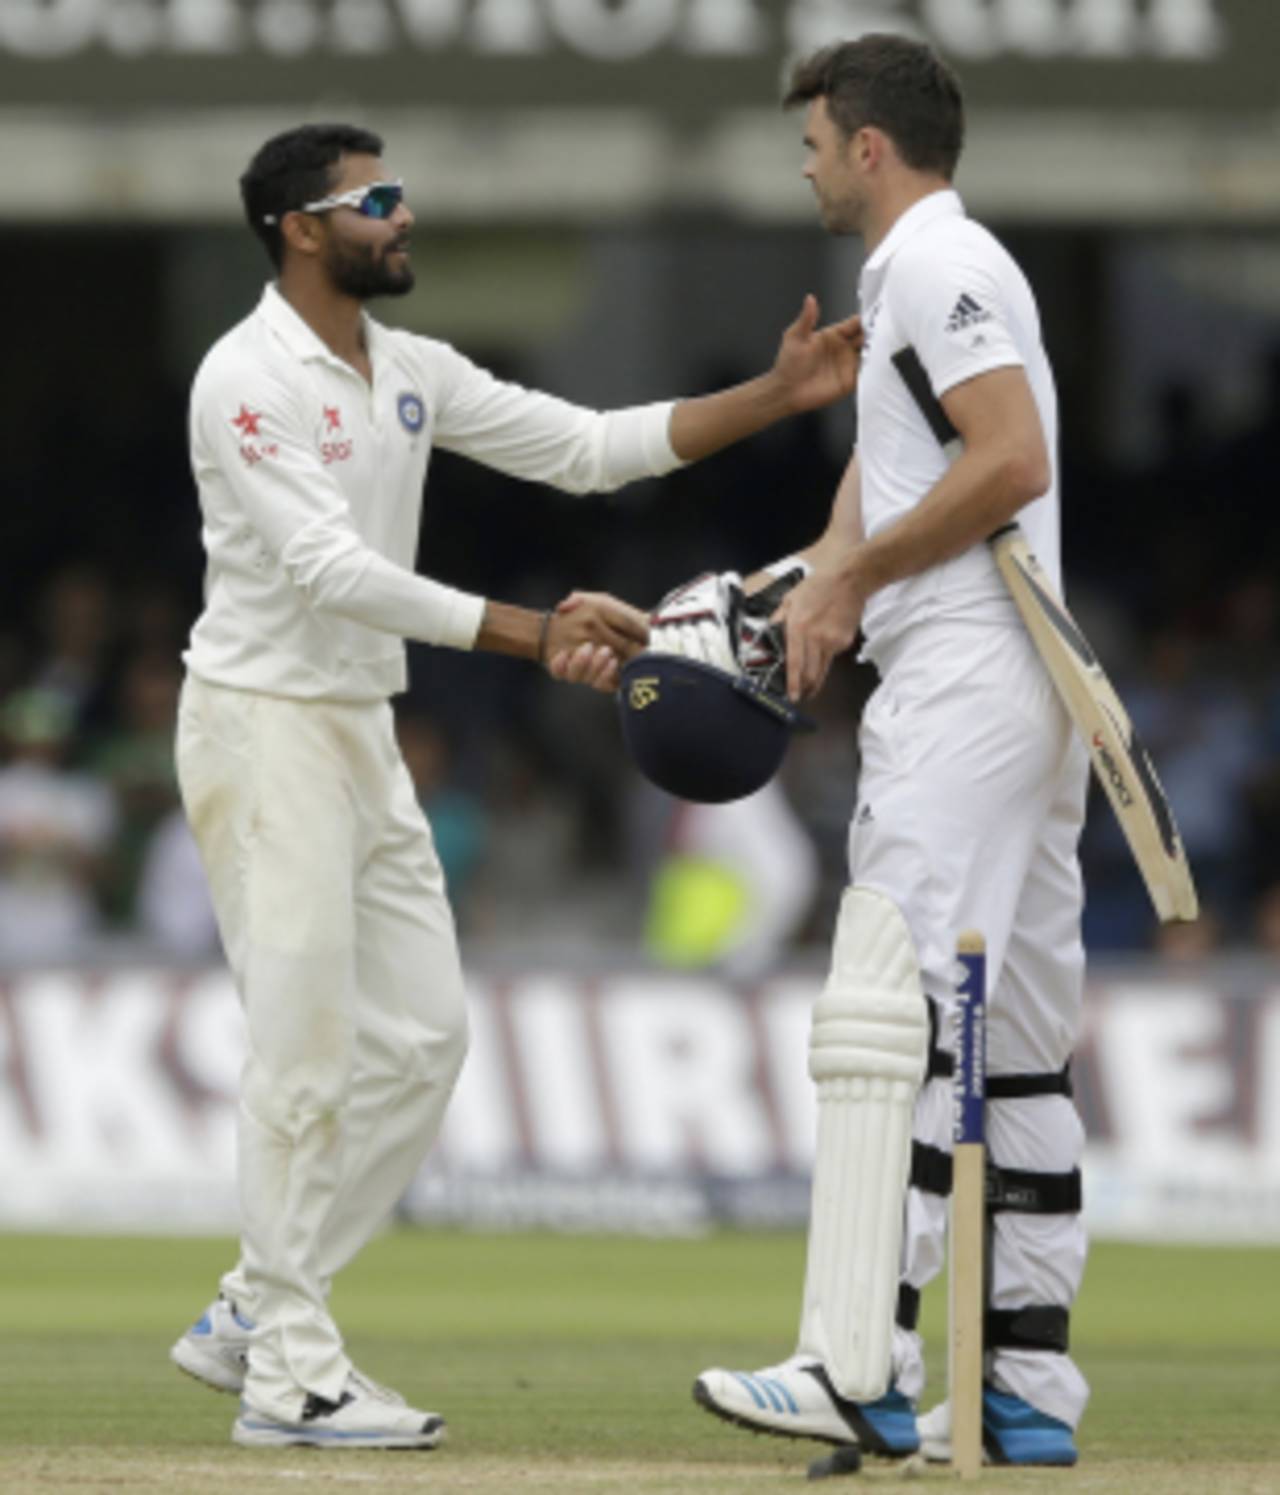 Ravindra Jadeja had been charged with a Level 2 offence for an incident with James Anderson in the first Test&nbsp;&nbsp;&bull;&nbsp;&nbsp;Associated Press